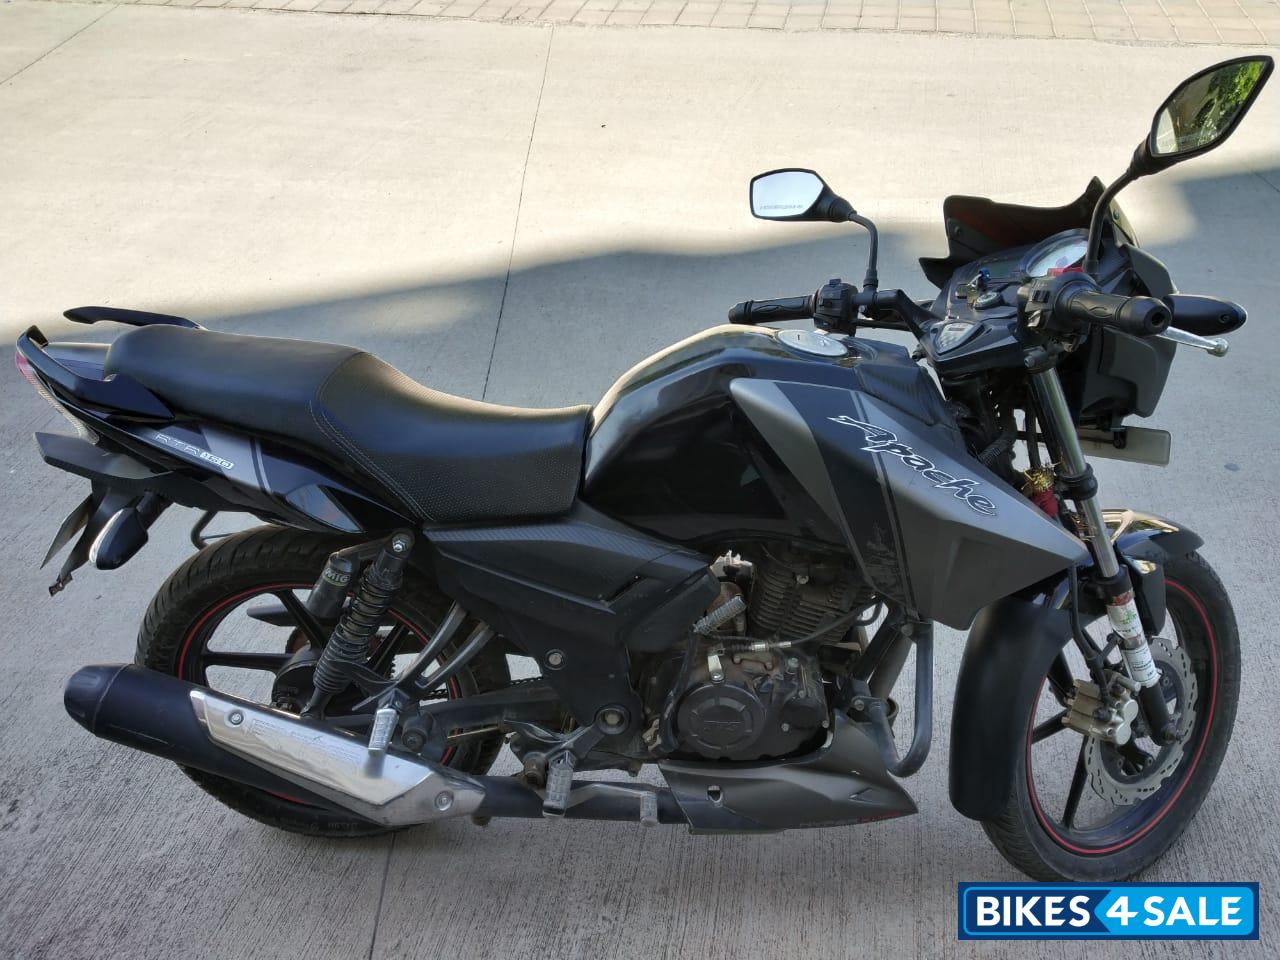 Used 13 Model Tvs Apache Rtr 160 For Sale In Bangalore Id Grey Colour Bikes4sale